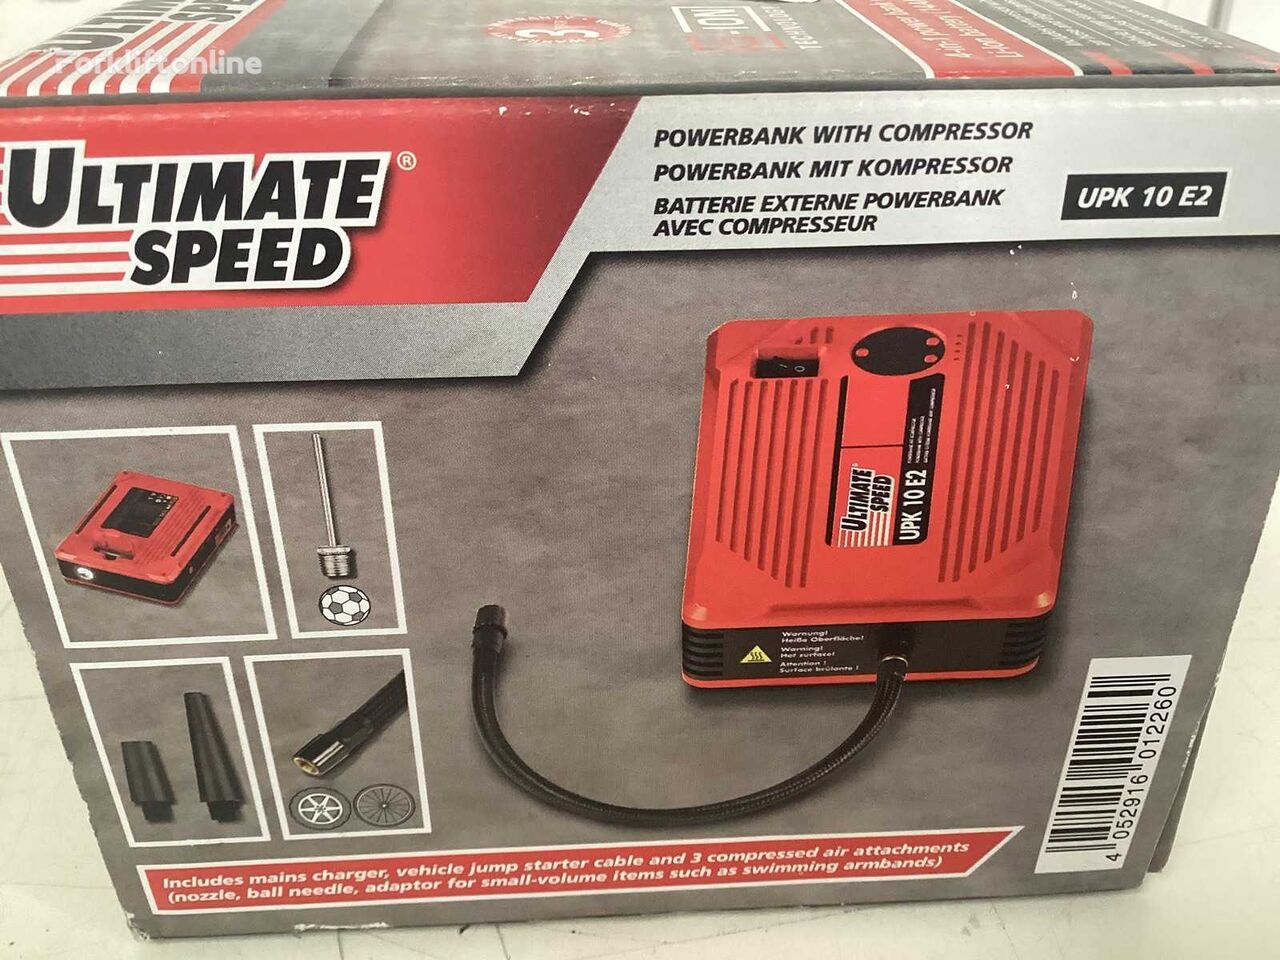 Ultimate Speed - Powerbank whit Compressor forklift battery charger